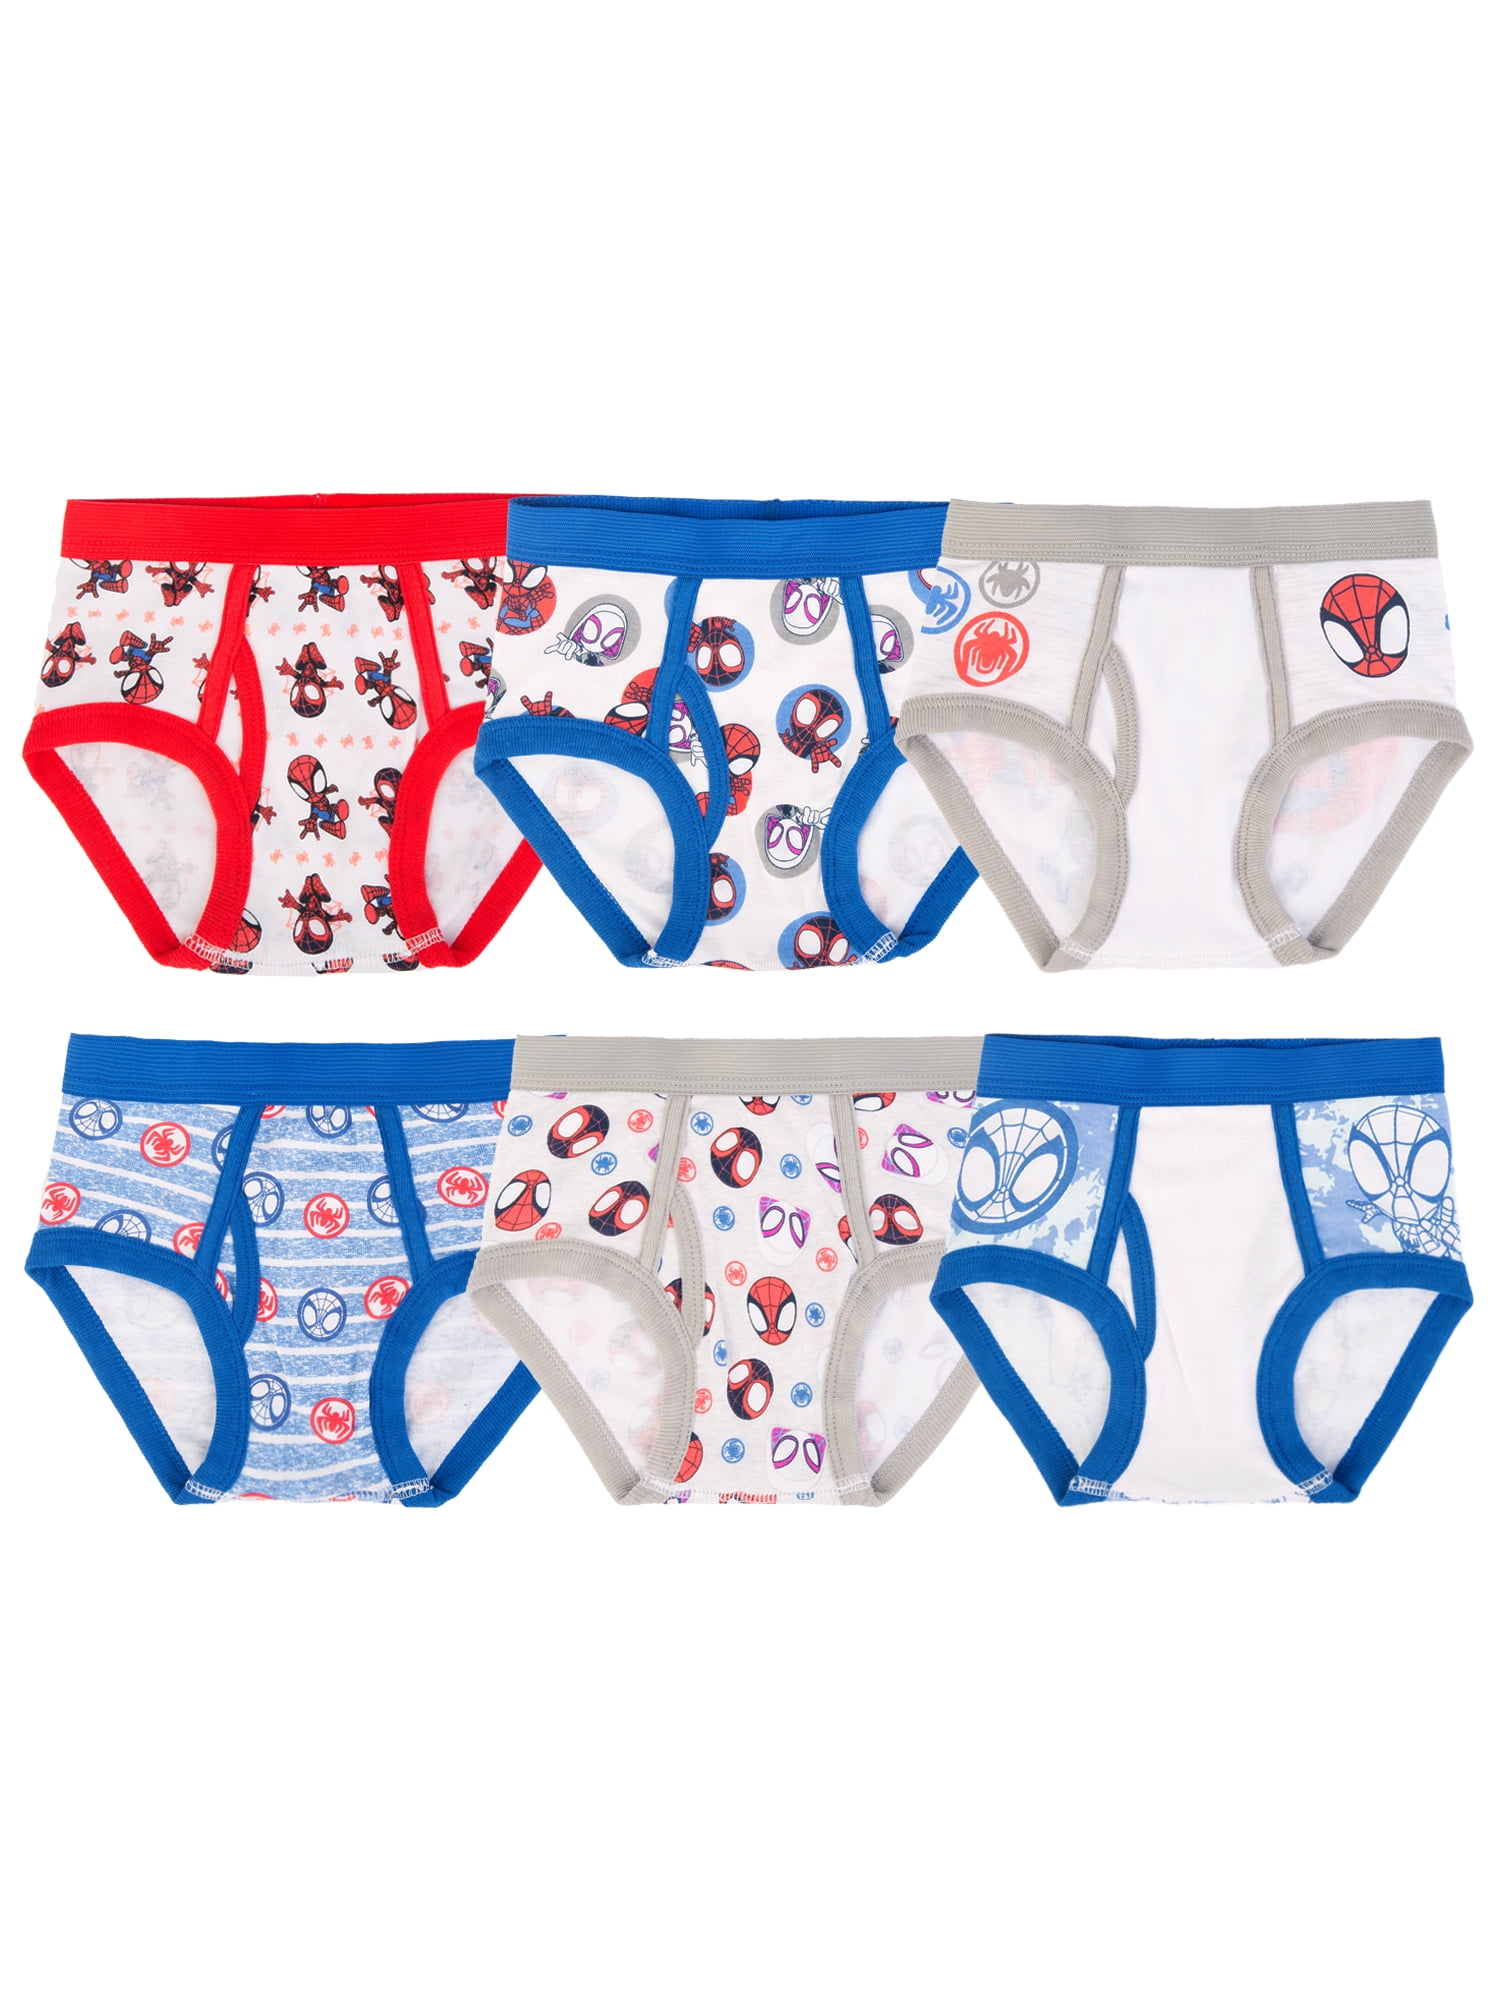 Spidey and His Amazing Friends Toddler Boys Briefs, 6 Pack Sizes